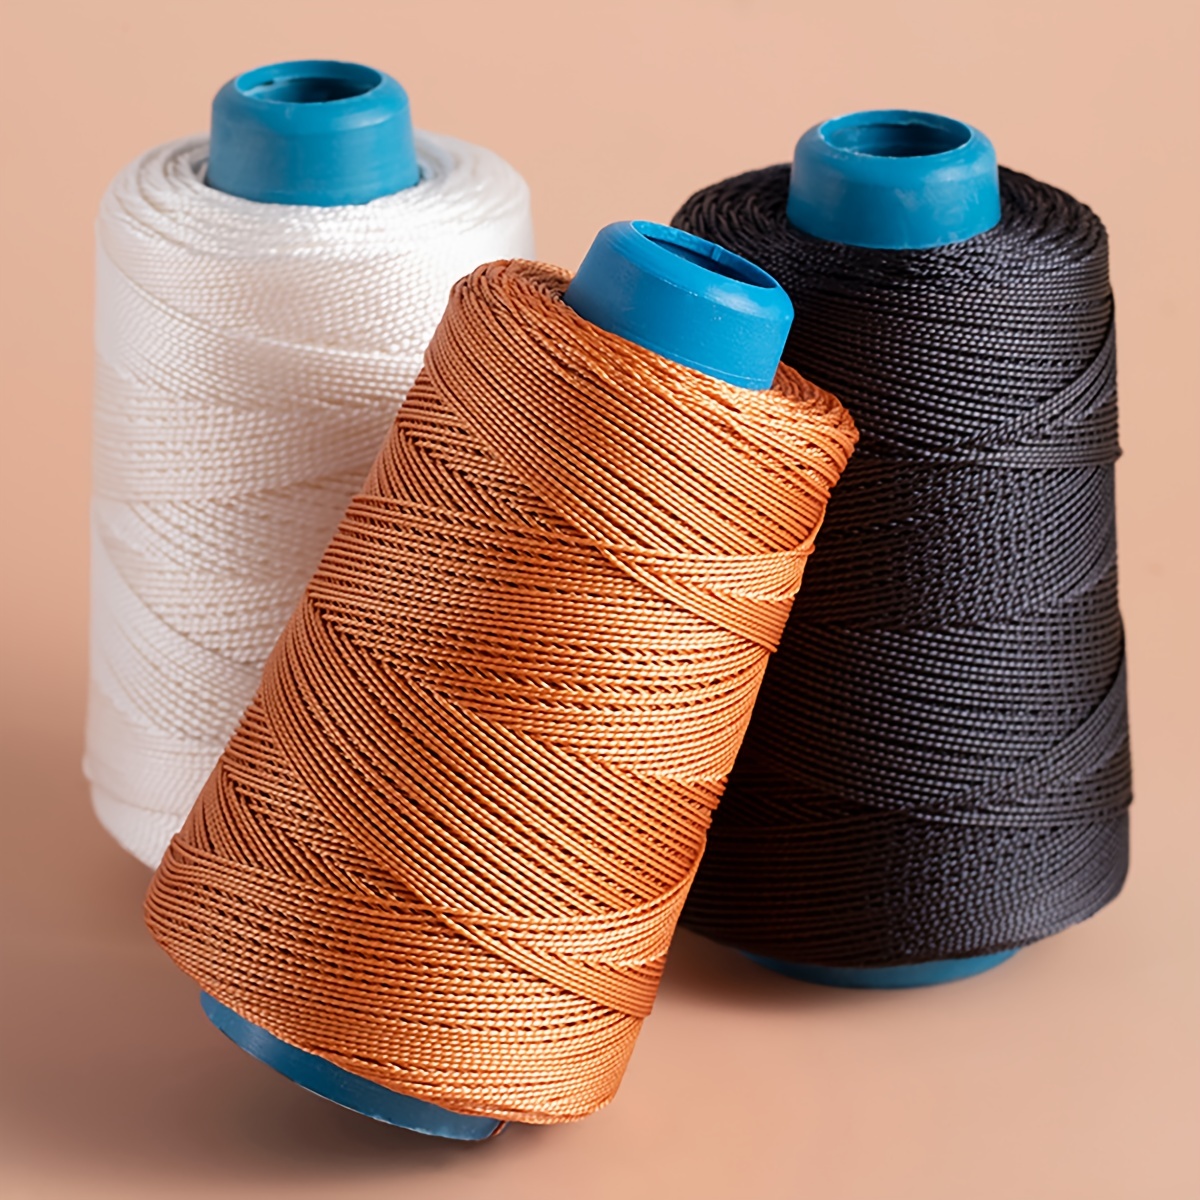 

1 Roll Approximately 273 Yards Shoe Thread, Patching Thread, Tire Thread, Shoe Repair Thread, Nylon Thread, Kite Thread, Fishing Thread, Hand Sewn Binding Thread Diy Sewing Thread